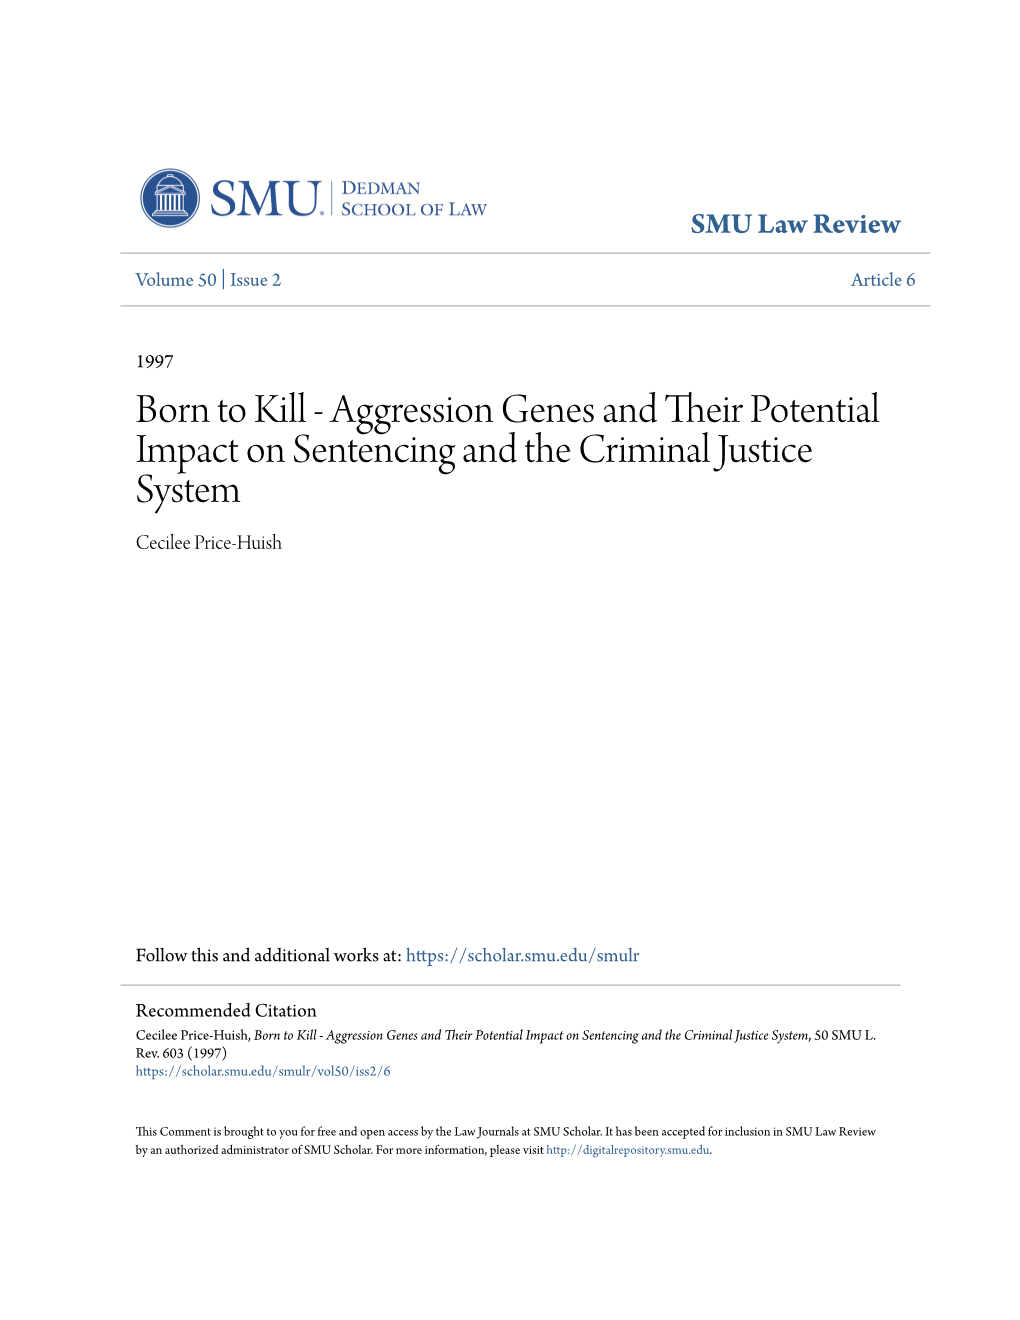 Born to Kill - Aggression Genes and Their Otp Ential Impact on Sentencing and the Criminal Justice System Cecilee Price-Huish